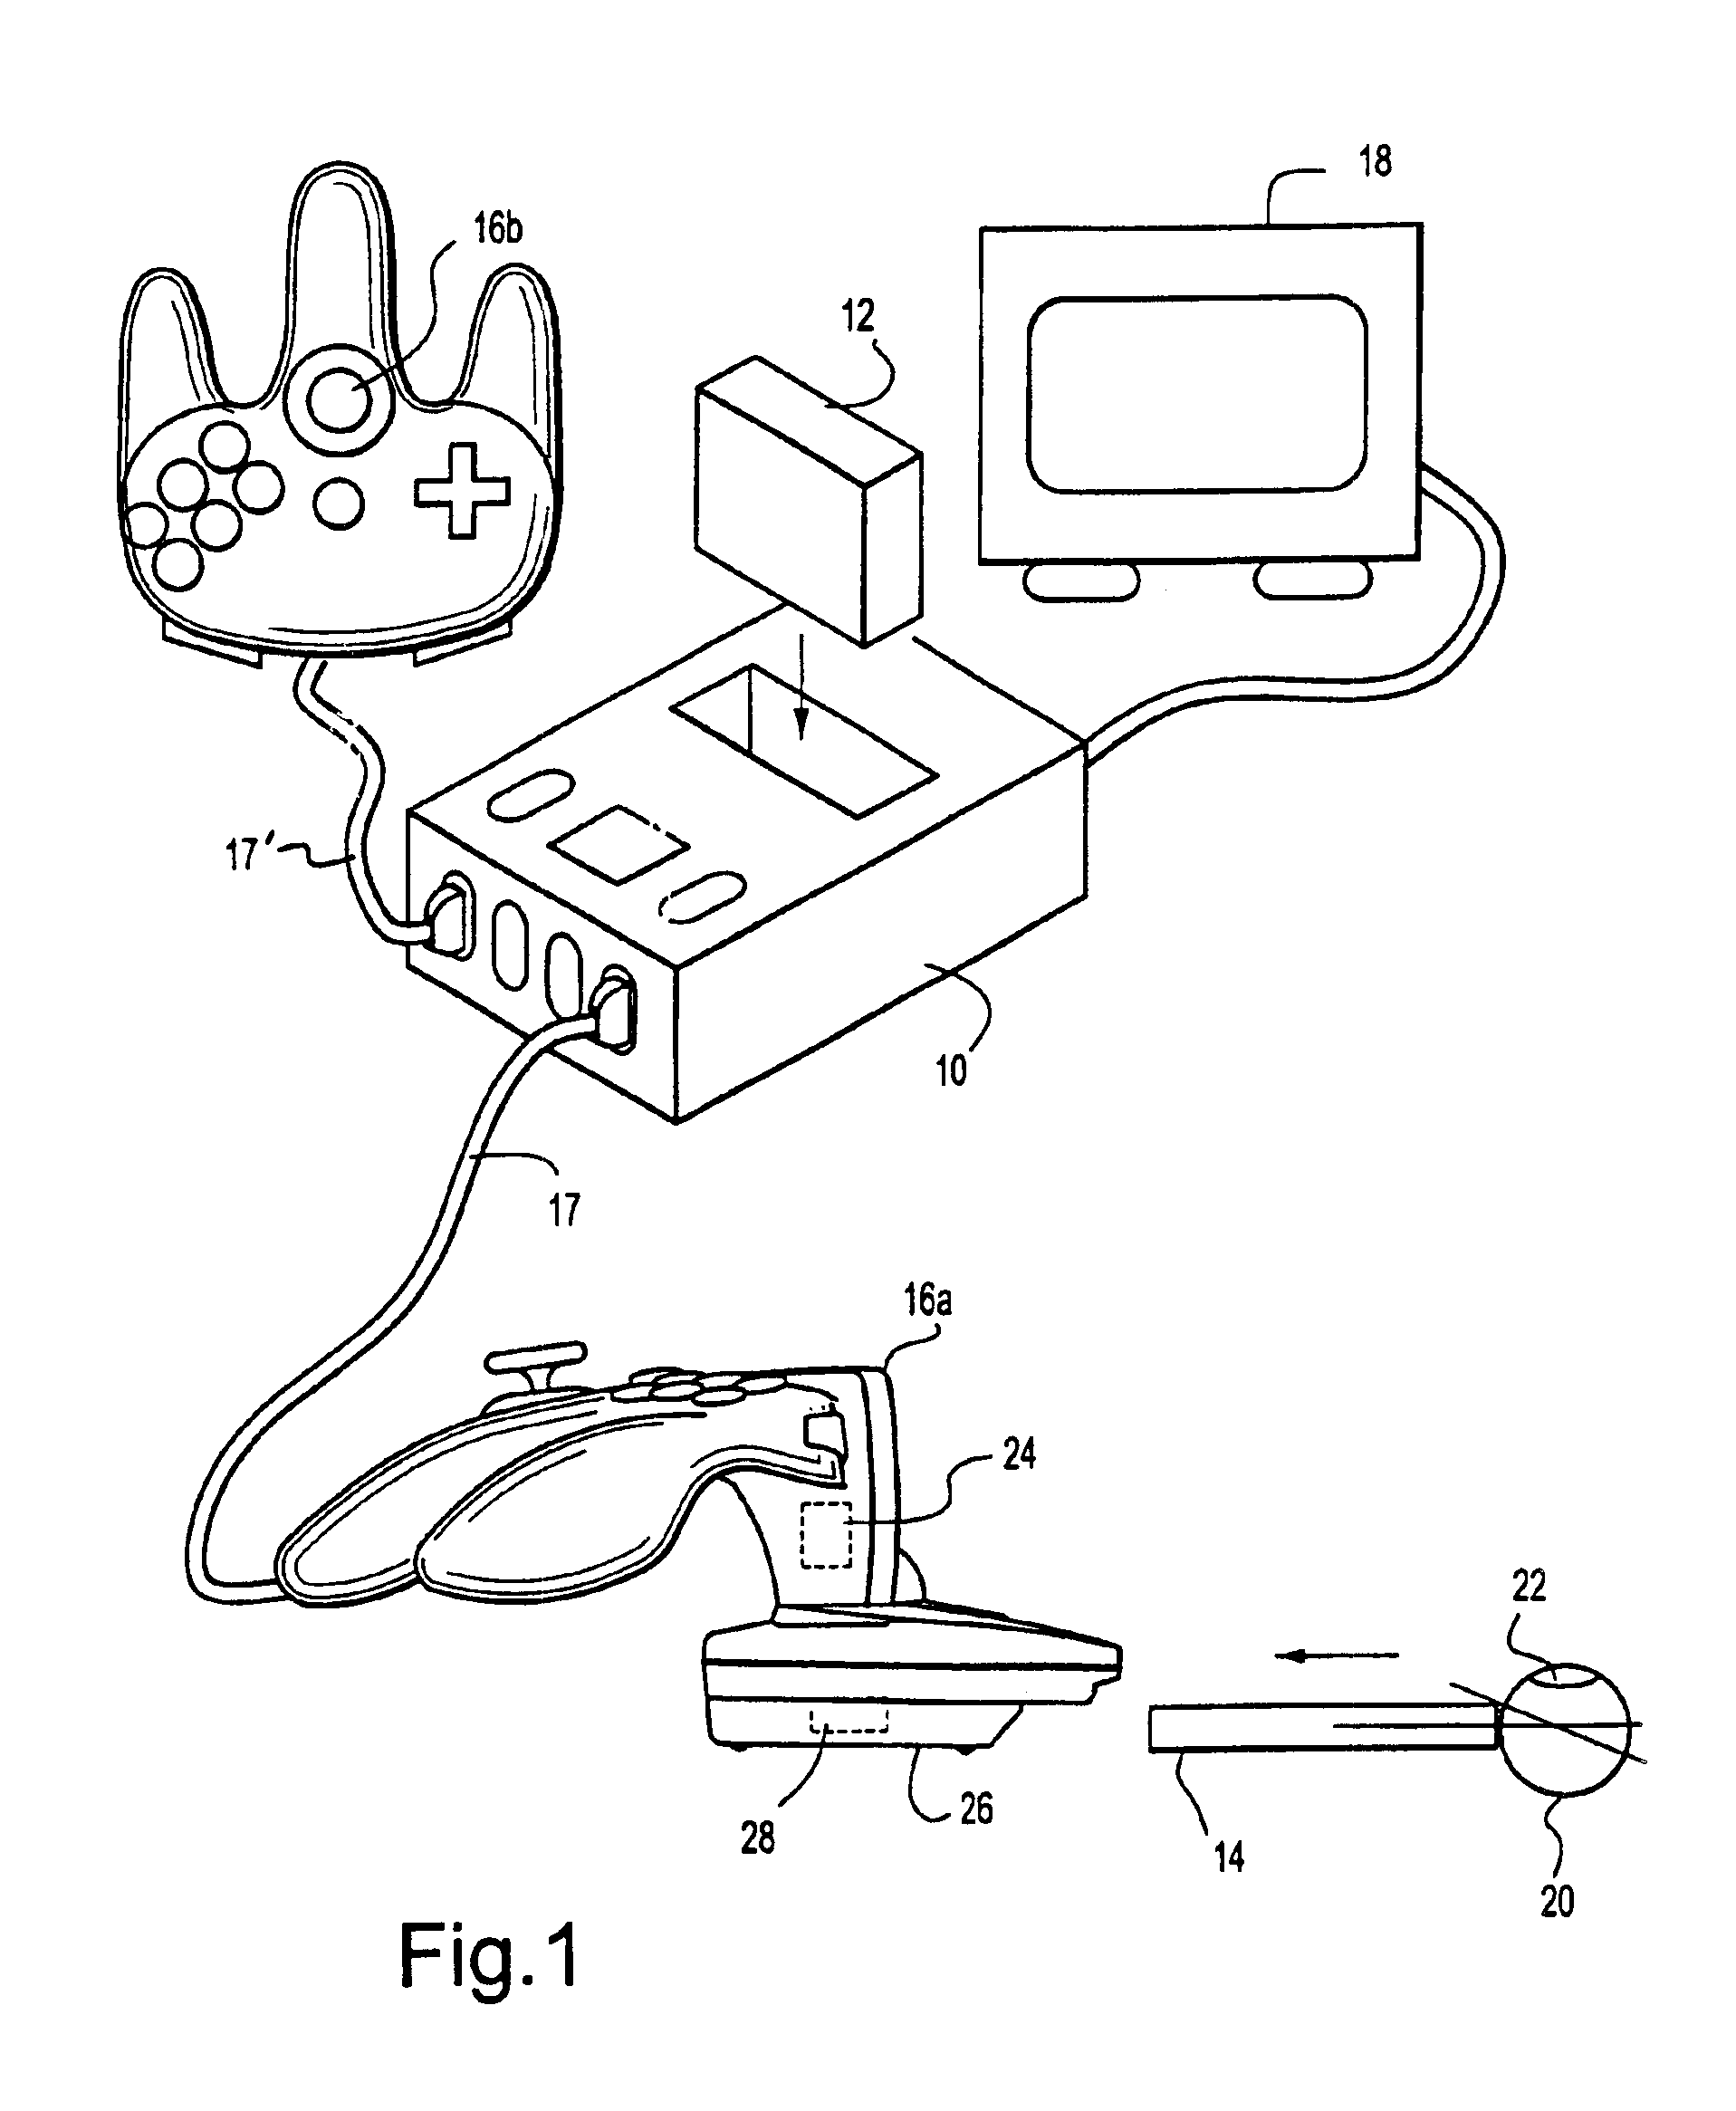 System and method for automatically editing captured images for inclusion into 3D video game play